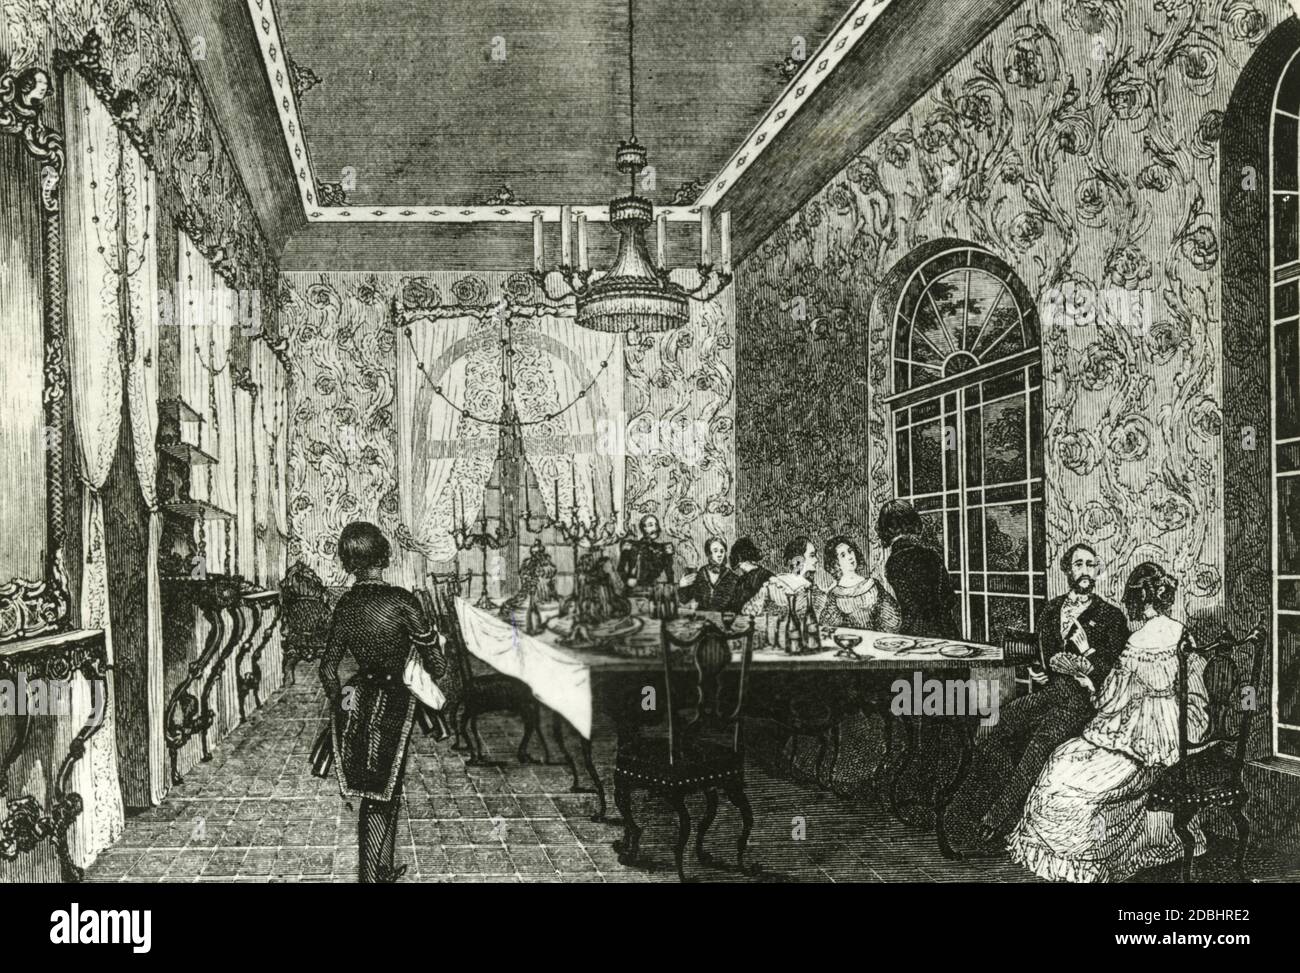 The engraving shows an evening party in the Renaissance Hall of the Kroll Etablissement (later Kroll Opera) in Berlin-Mitte, which was newly opened in 1844. Stock Photo